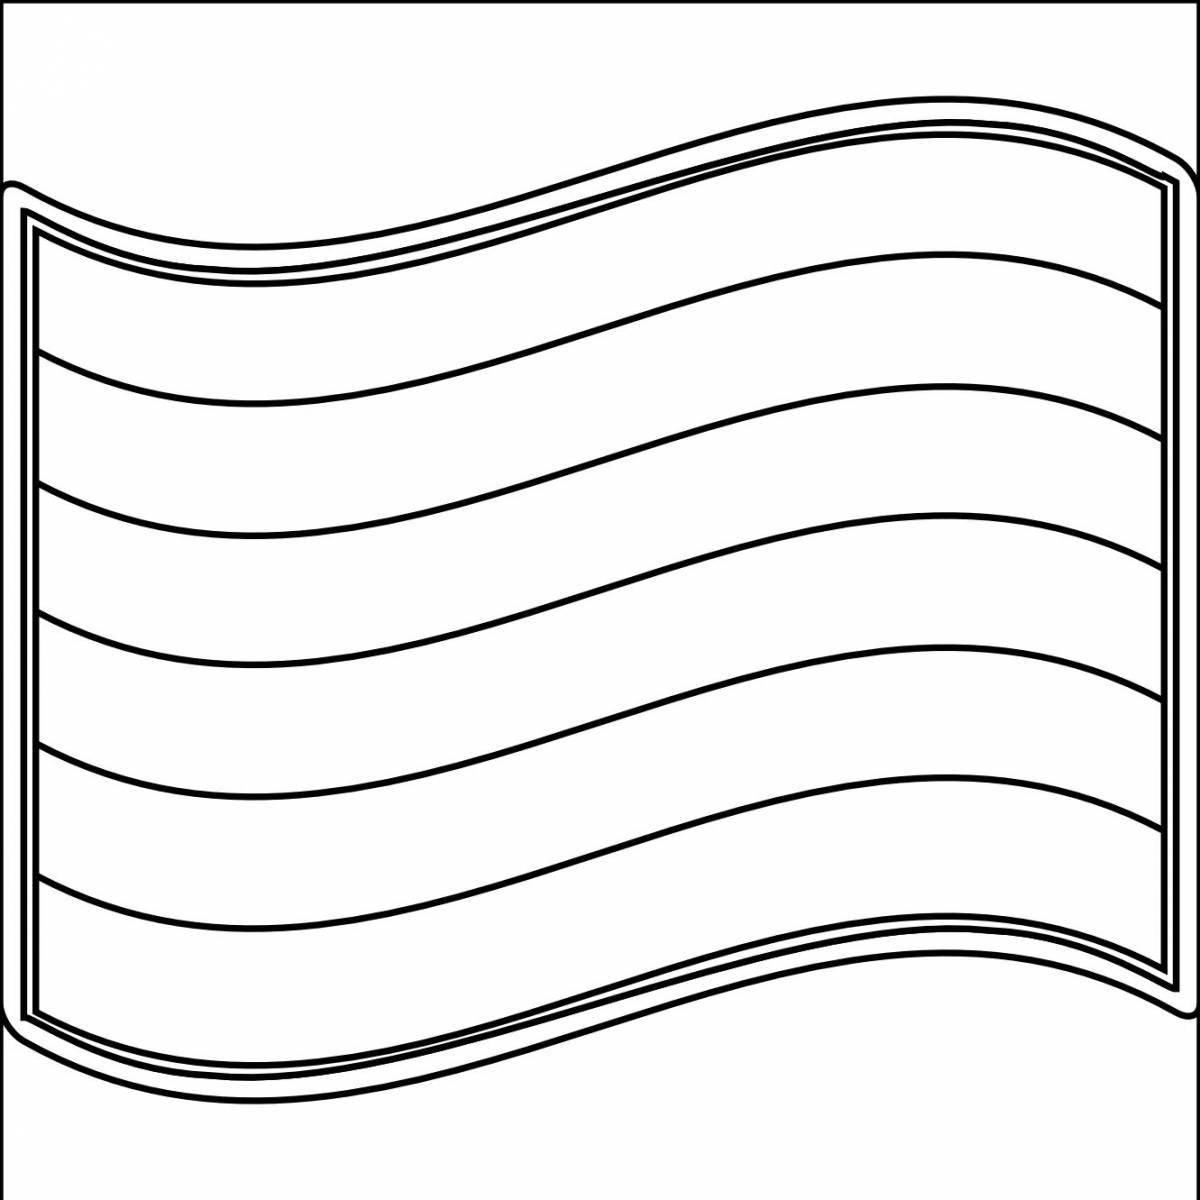 Russian flag coloring page